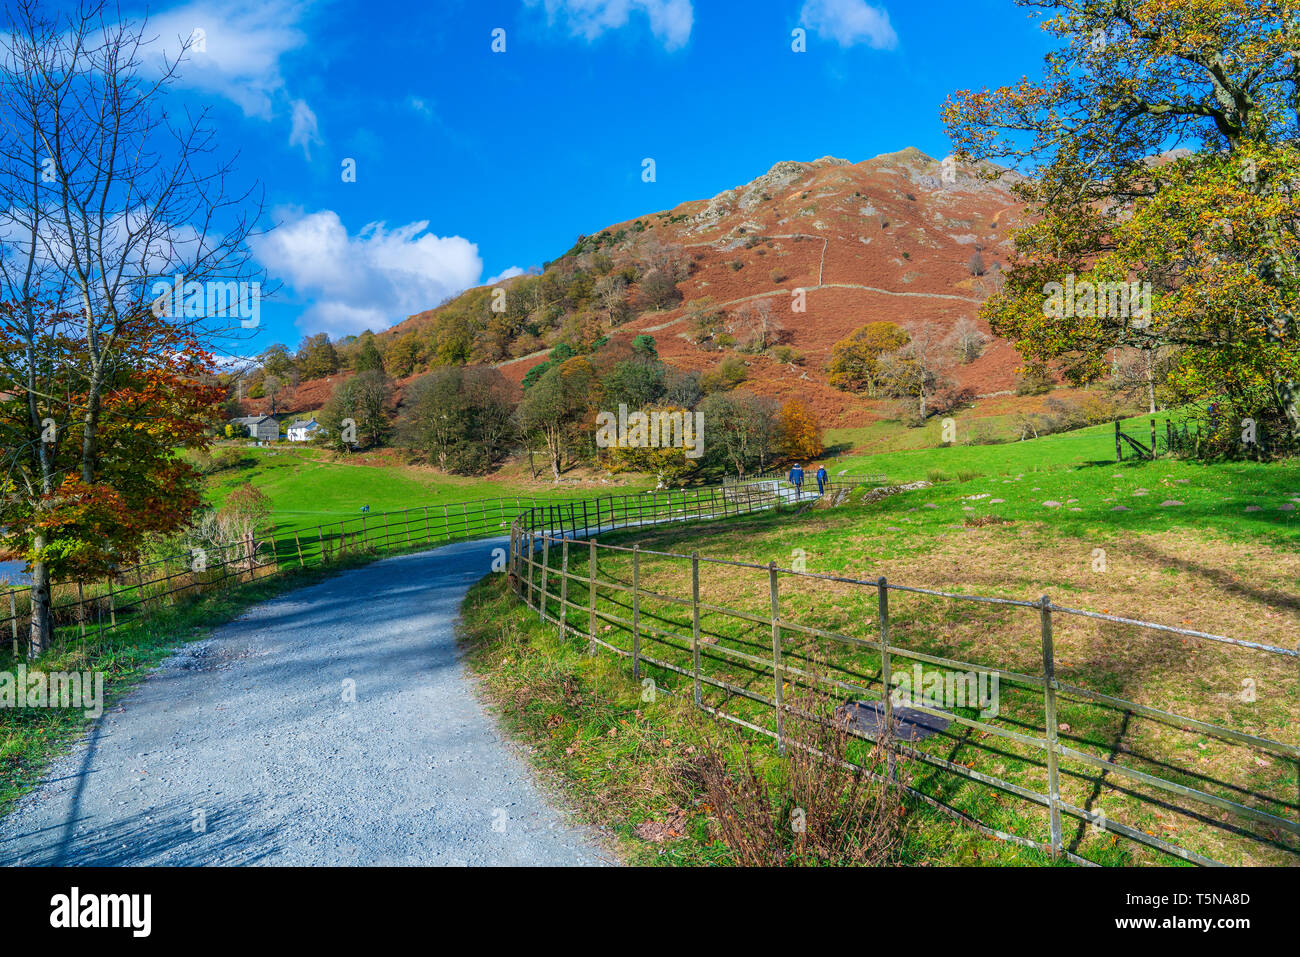 Loughrigg Tarn Lake Road, Parc National de Lake District, Cumbria, Angleterre, Royaume-Uni, Europe. Banque D'Images